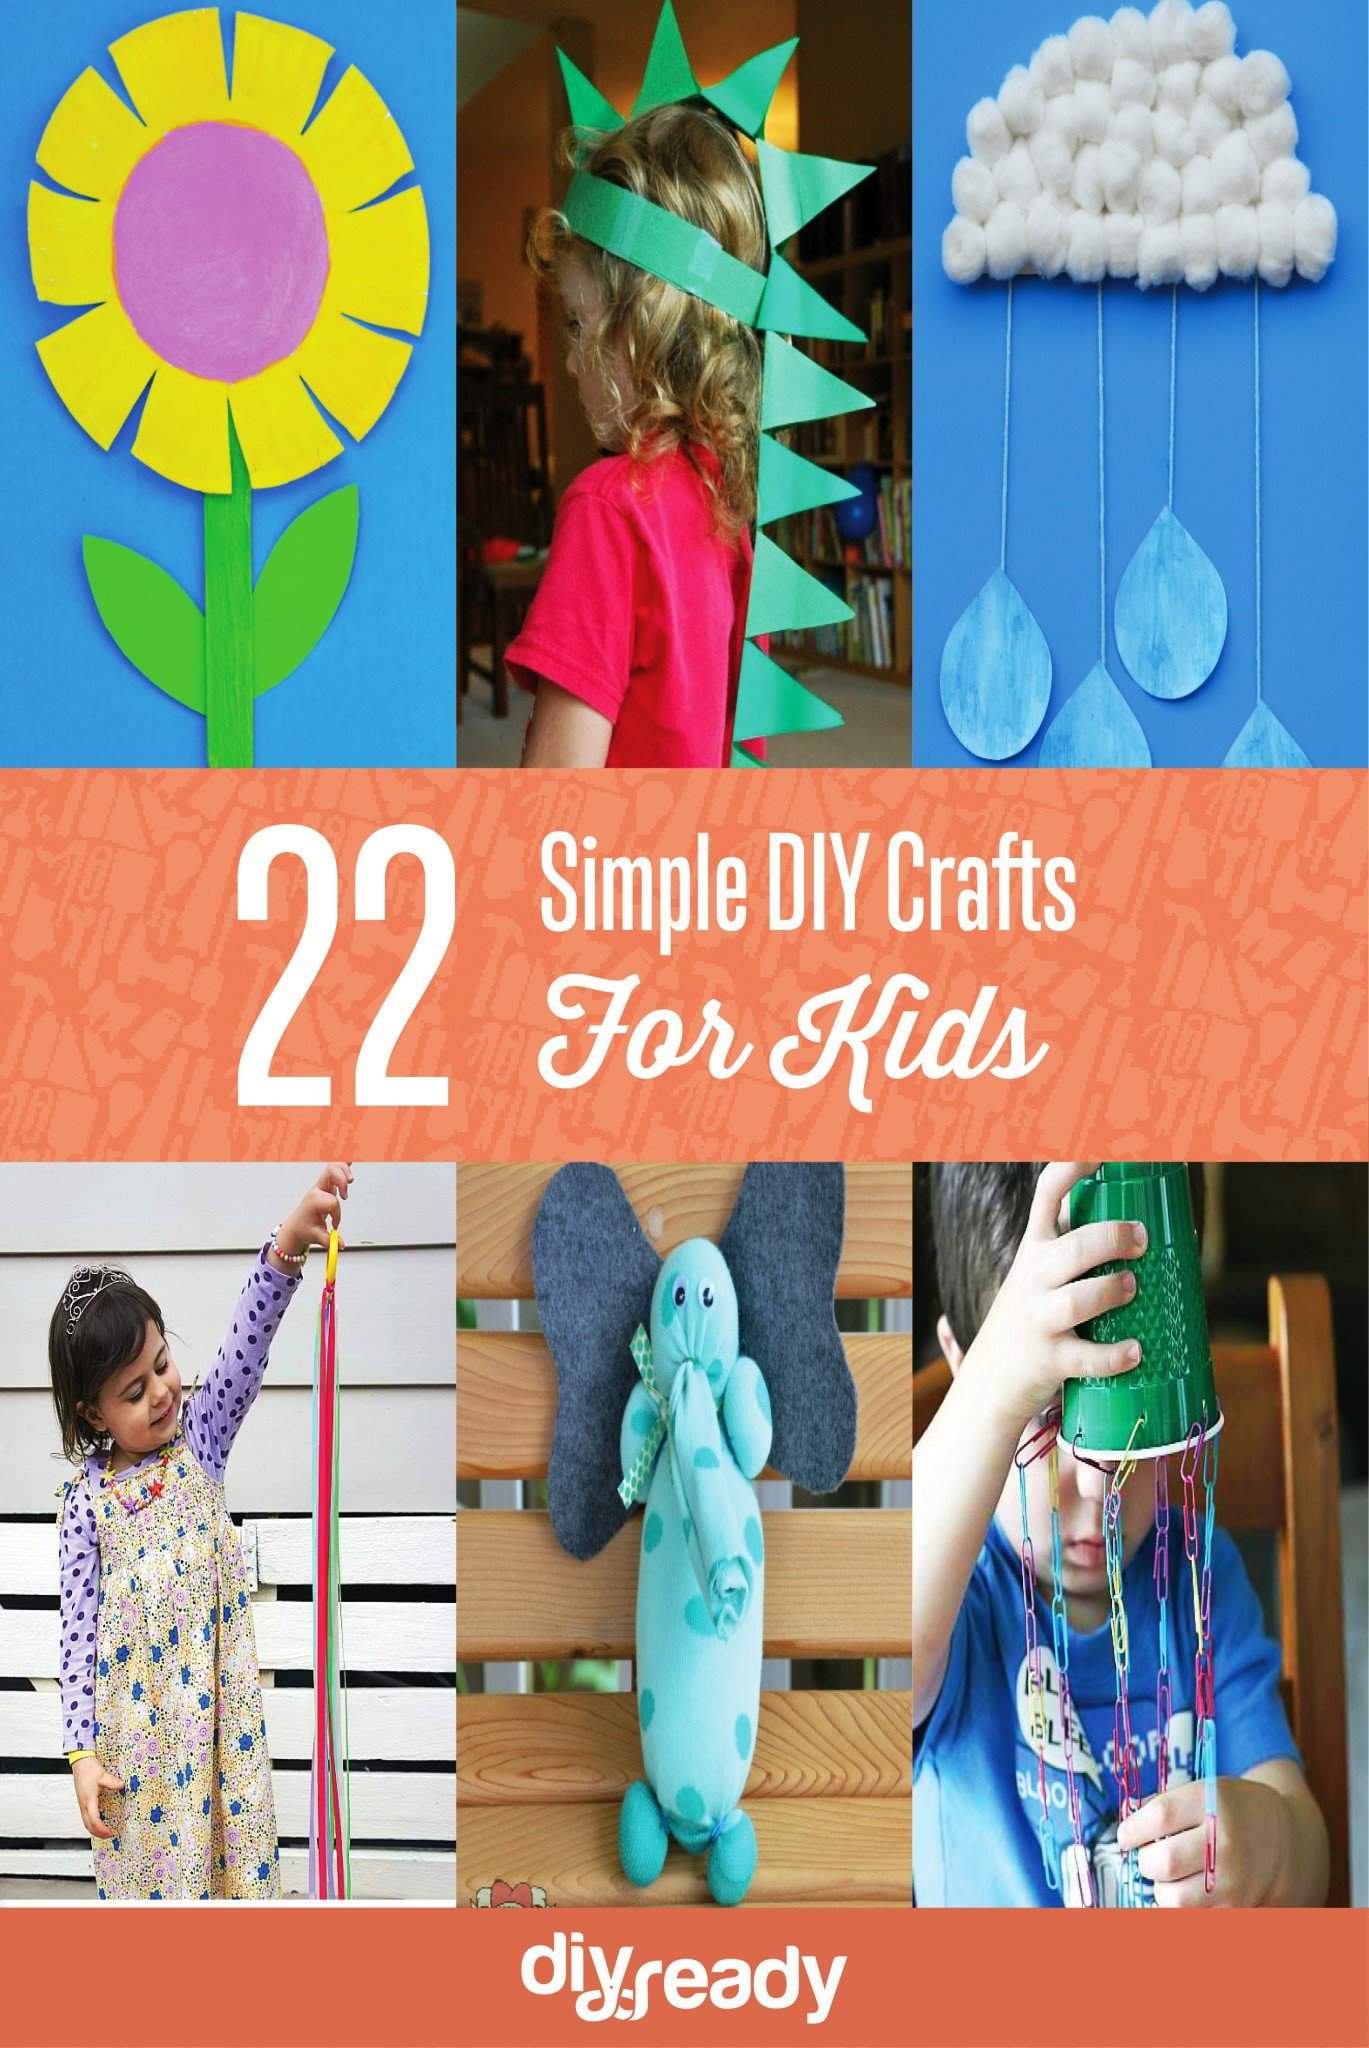 Simple DIY Crafts For Kids | DIY Projects To Do This Summer | https://diyprojects.com/simple-diy-crafts-for-kids/